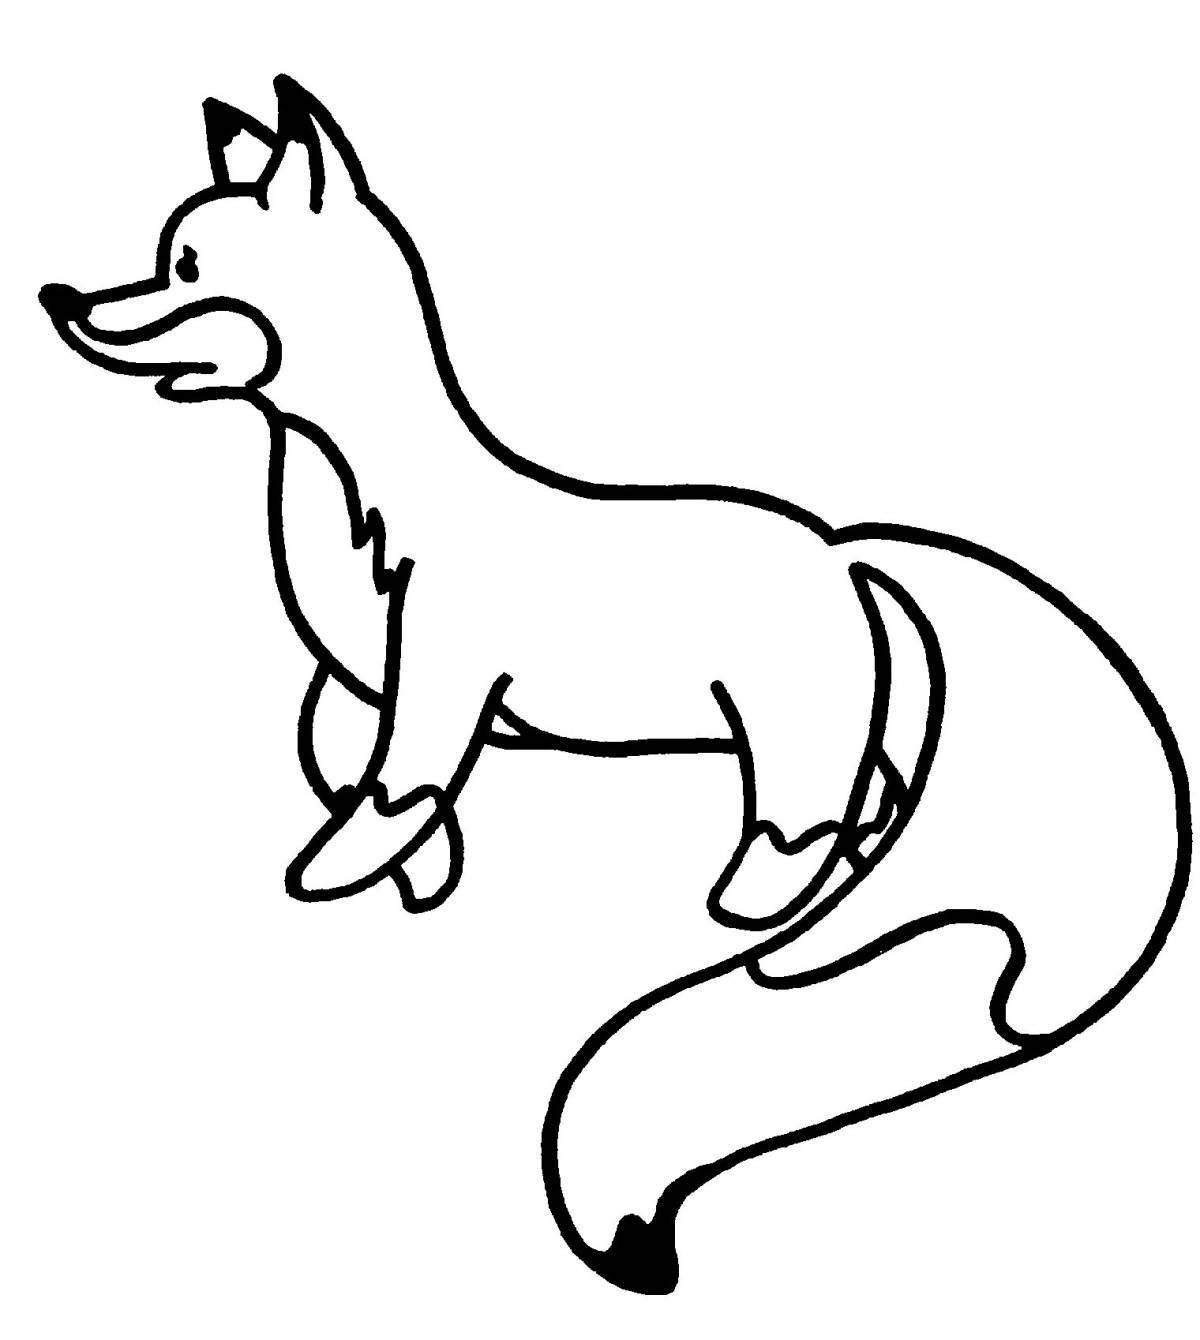 Radiant coloring page fox figure